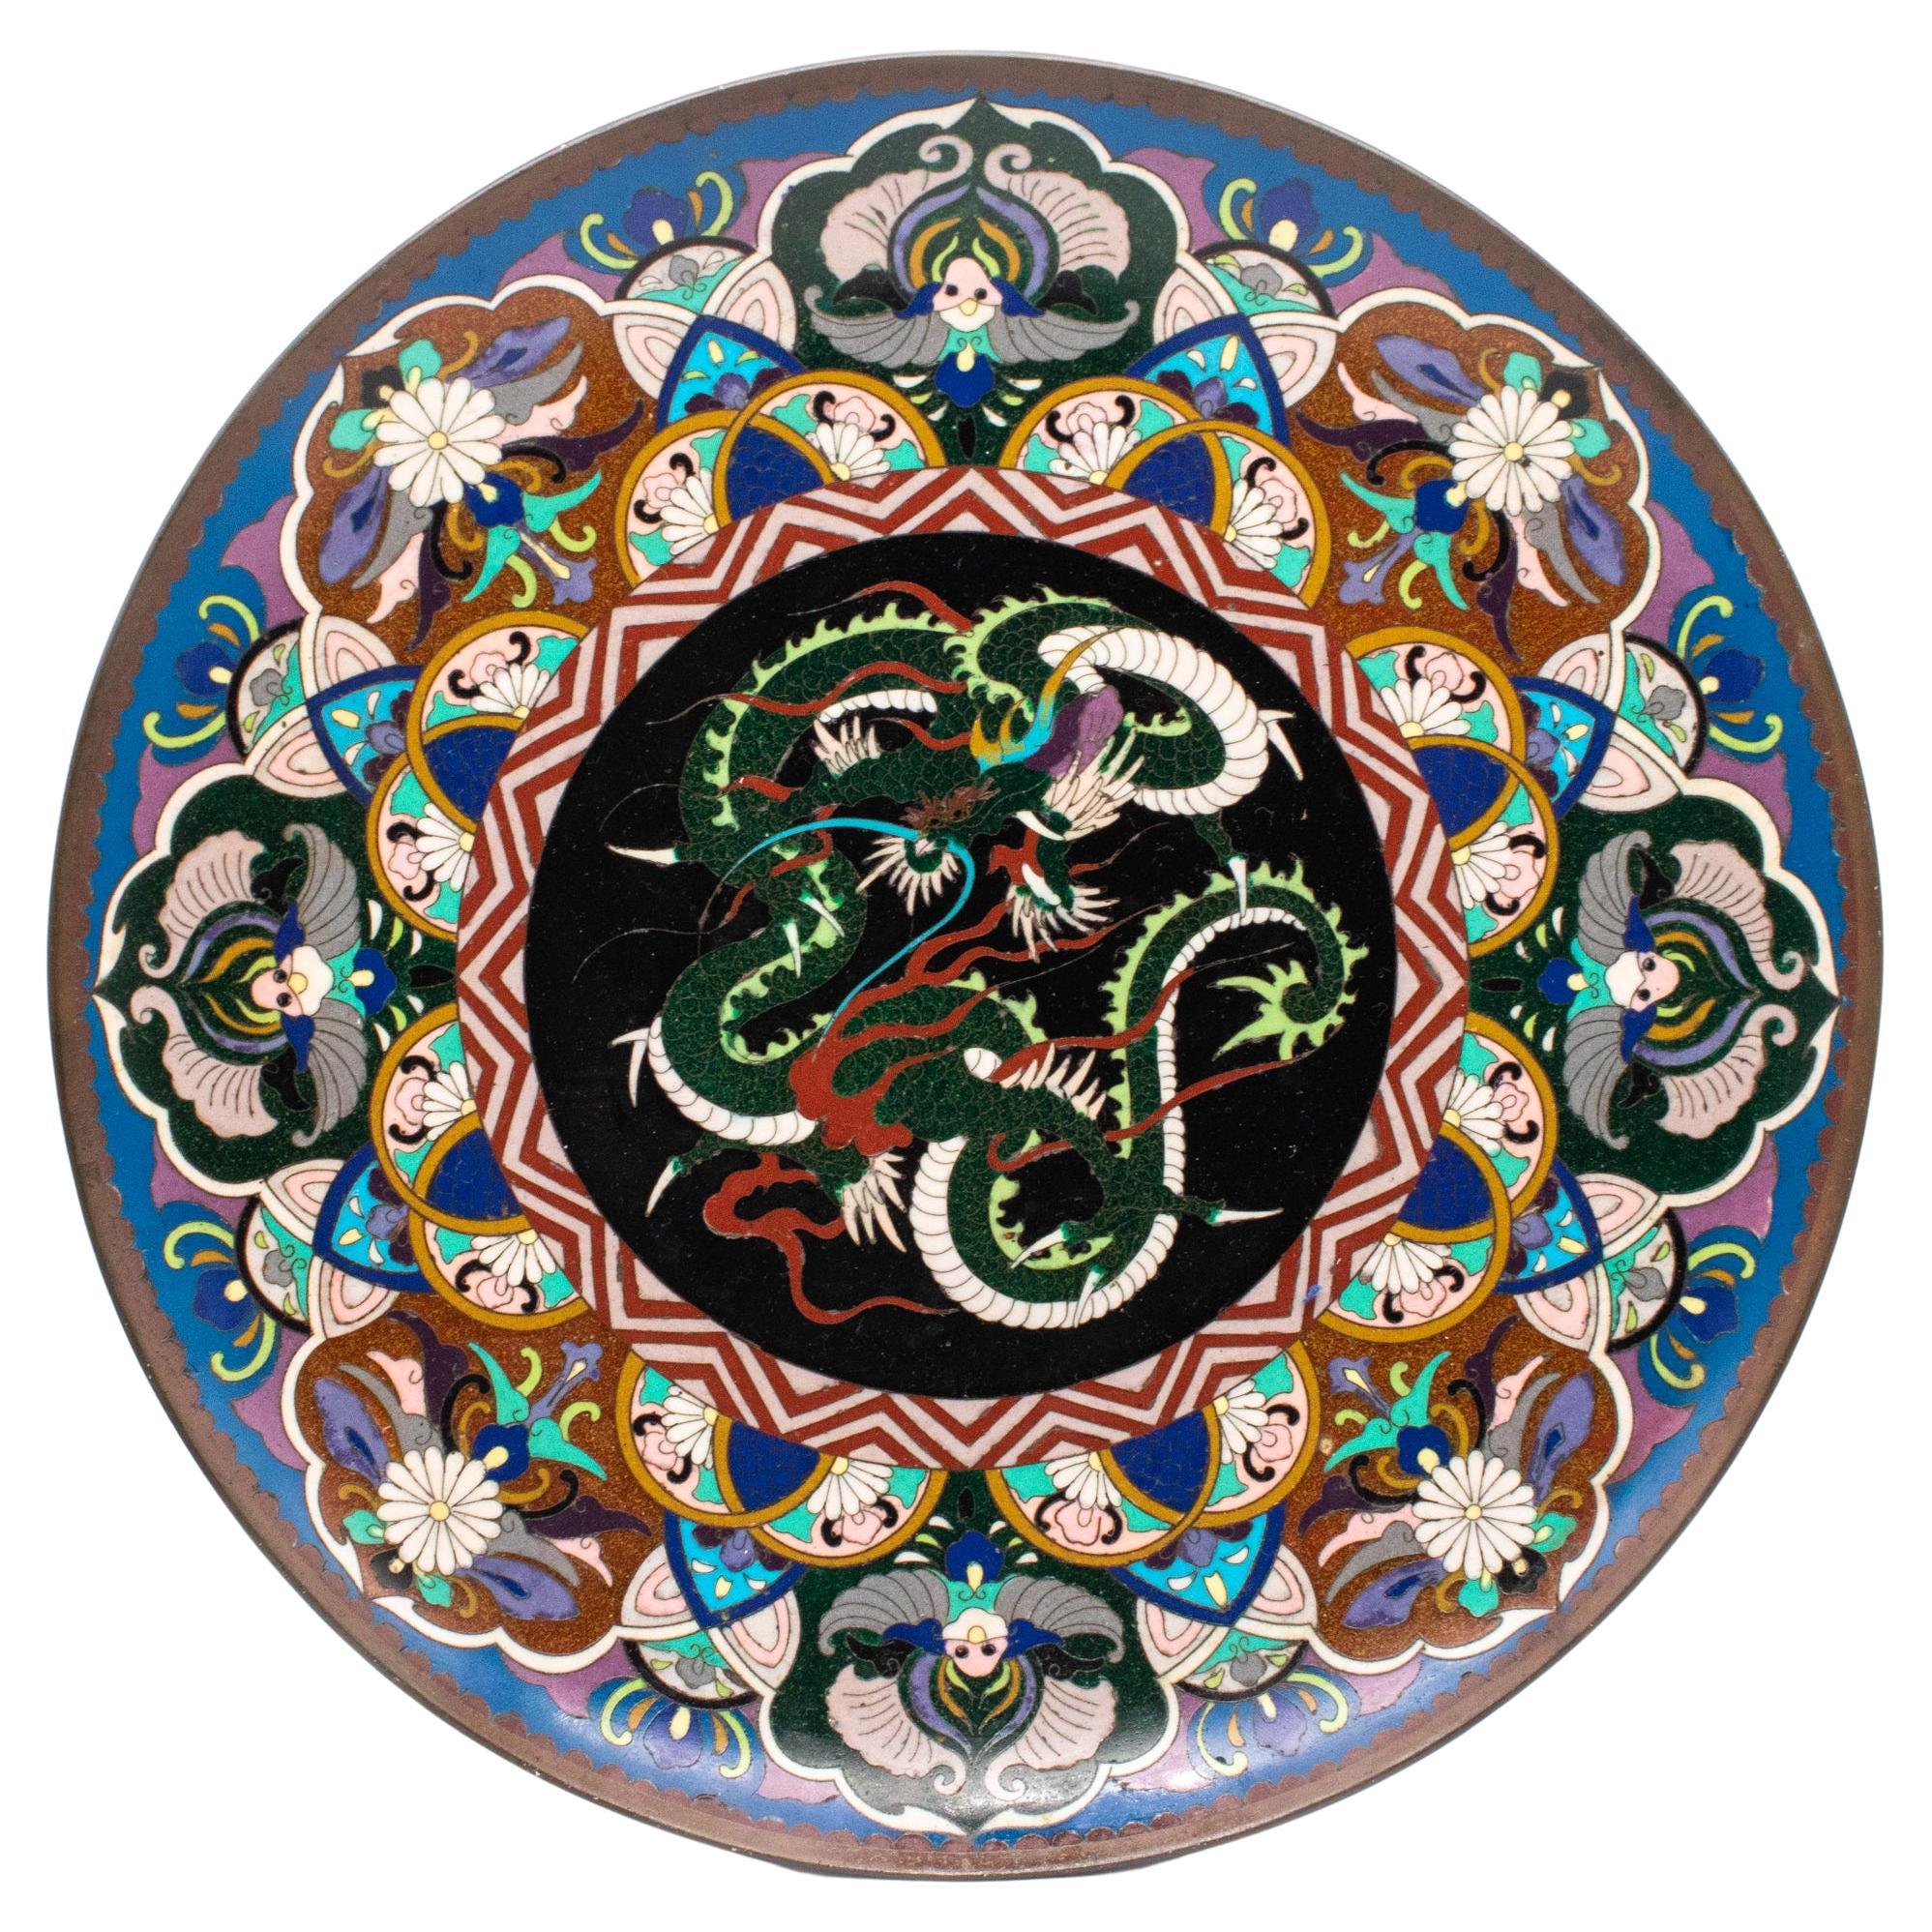 Japan 1900 Meiji Period Charger With A Dragon In Cloisonné Multicolor Enamel For Sale